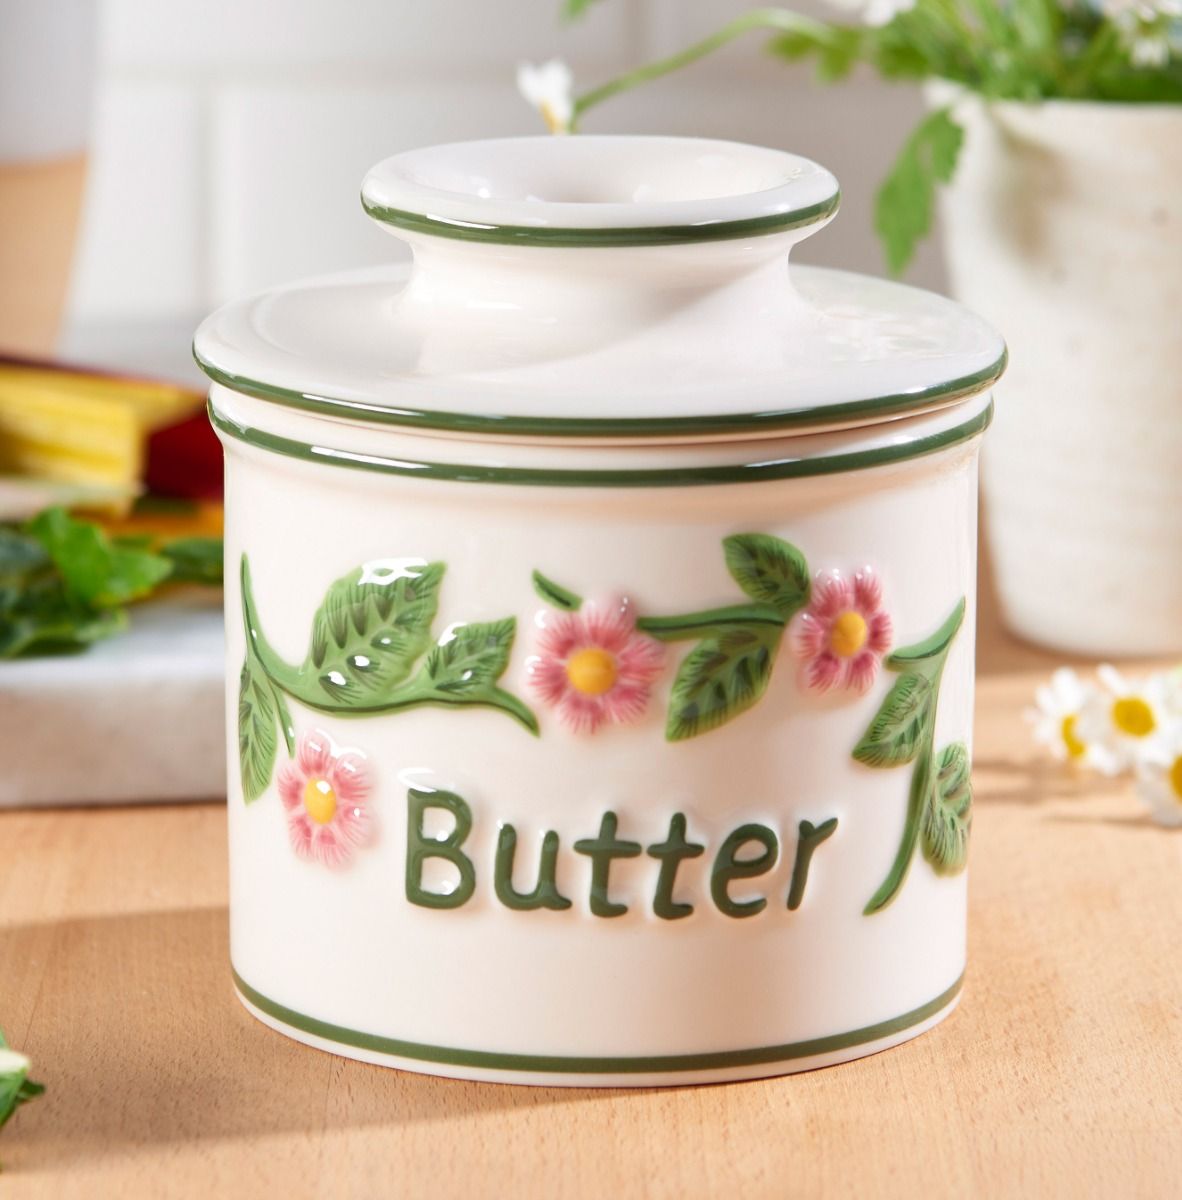 The Original Hand Painted Raised Floral Butter Bell Crock